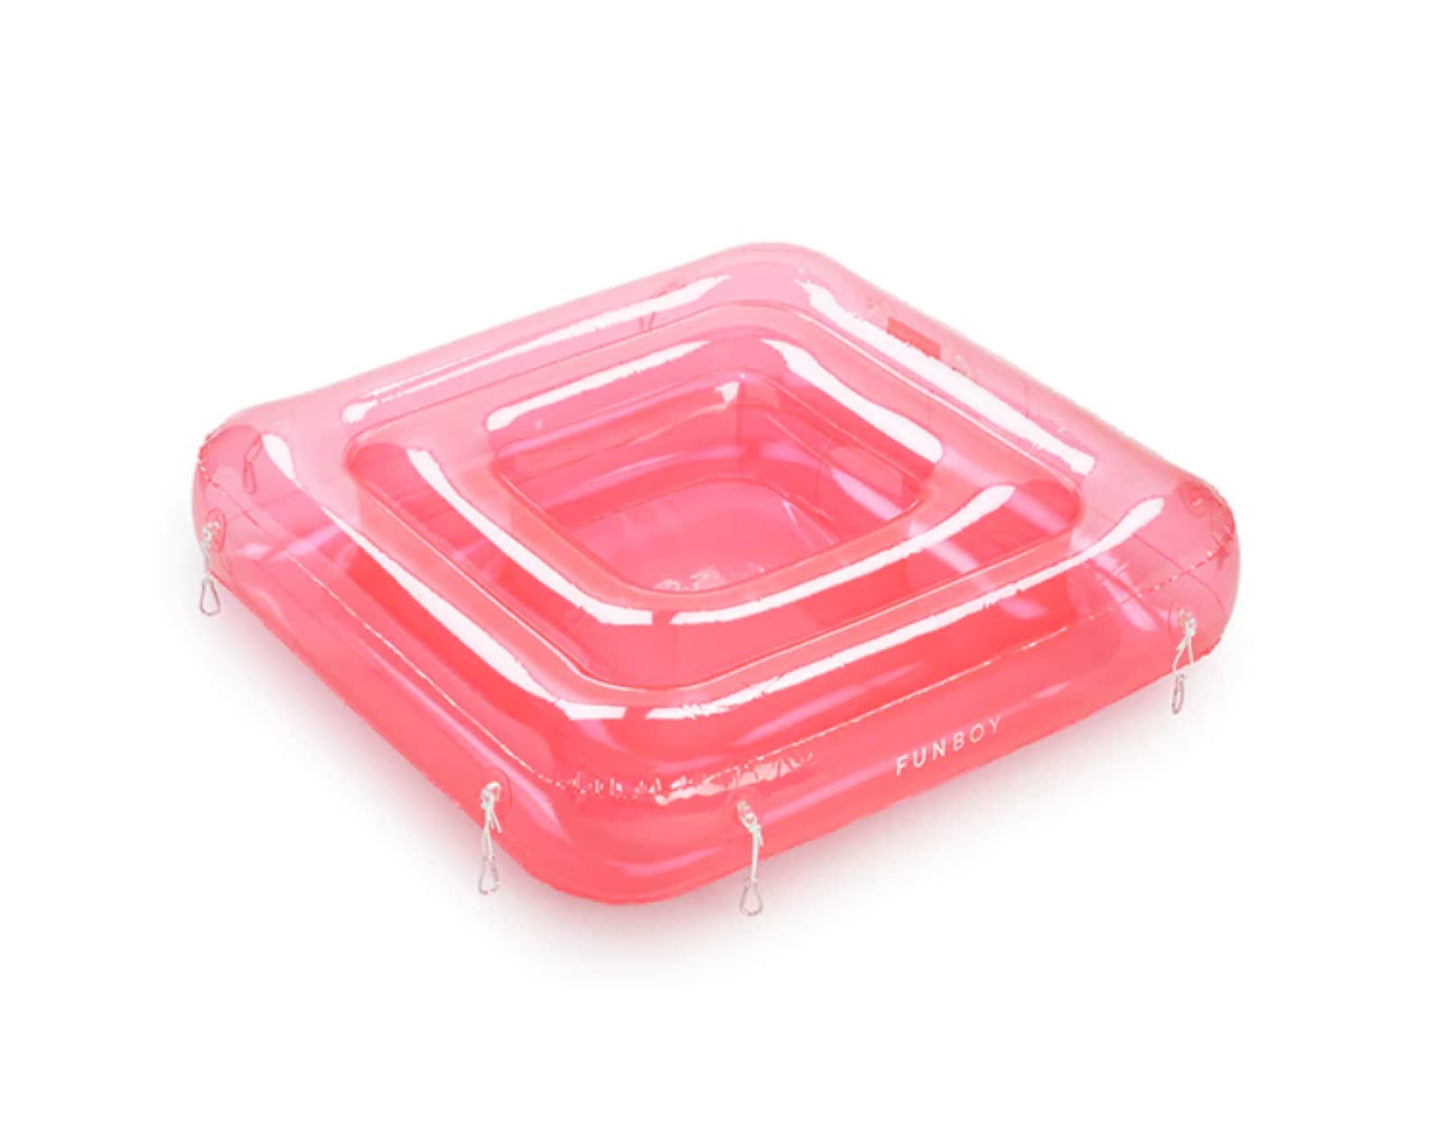 FUNBOY Clear Pink Chaise Connection Inflatable Drink Cooler, Connects Four Chaise Lounger Pool Floats, Luxury Bar Accessory Float, Perfect for a Summer Pool Party Clear Pink Chaise Connection Cooler